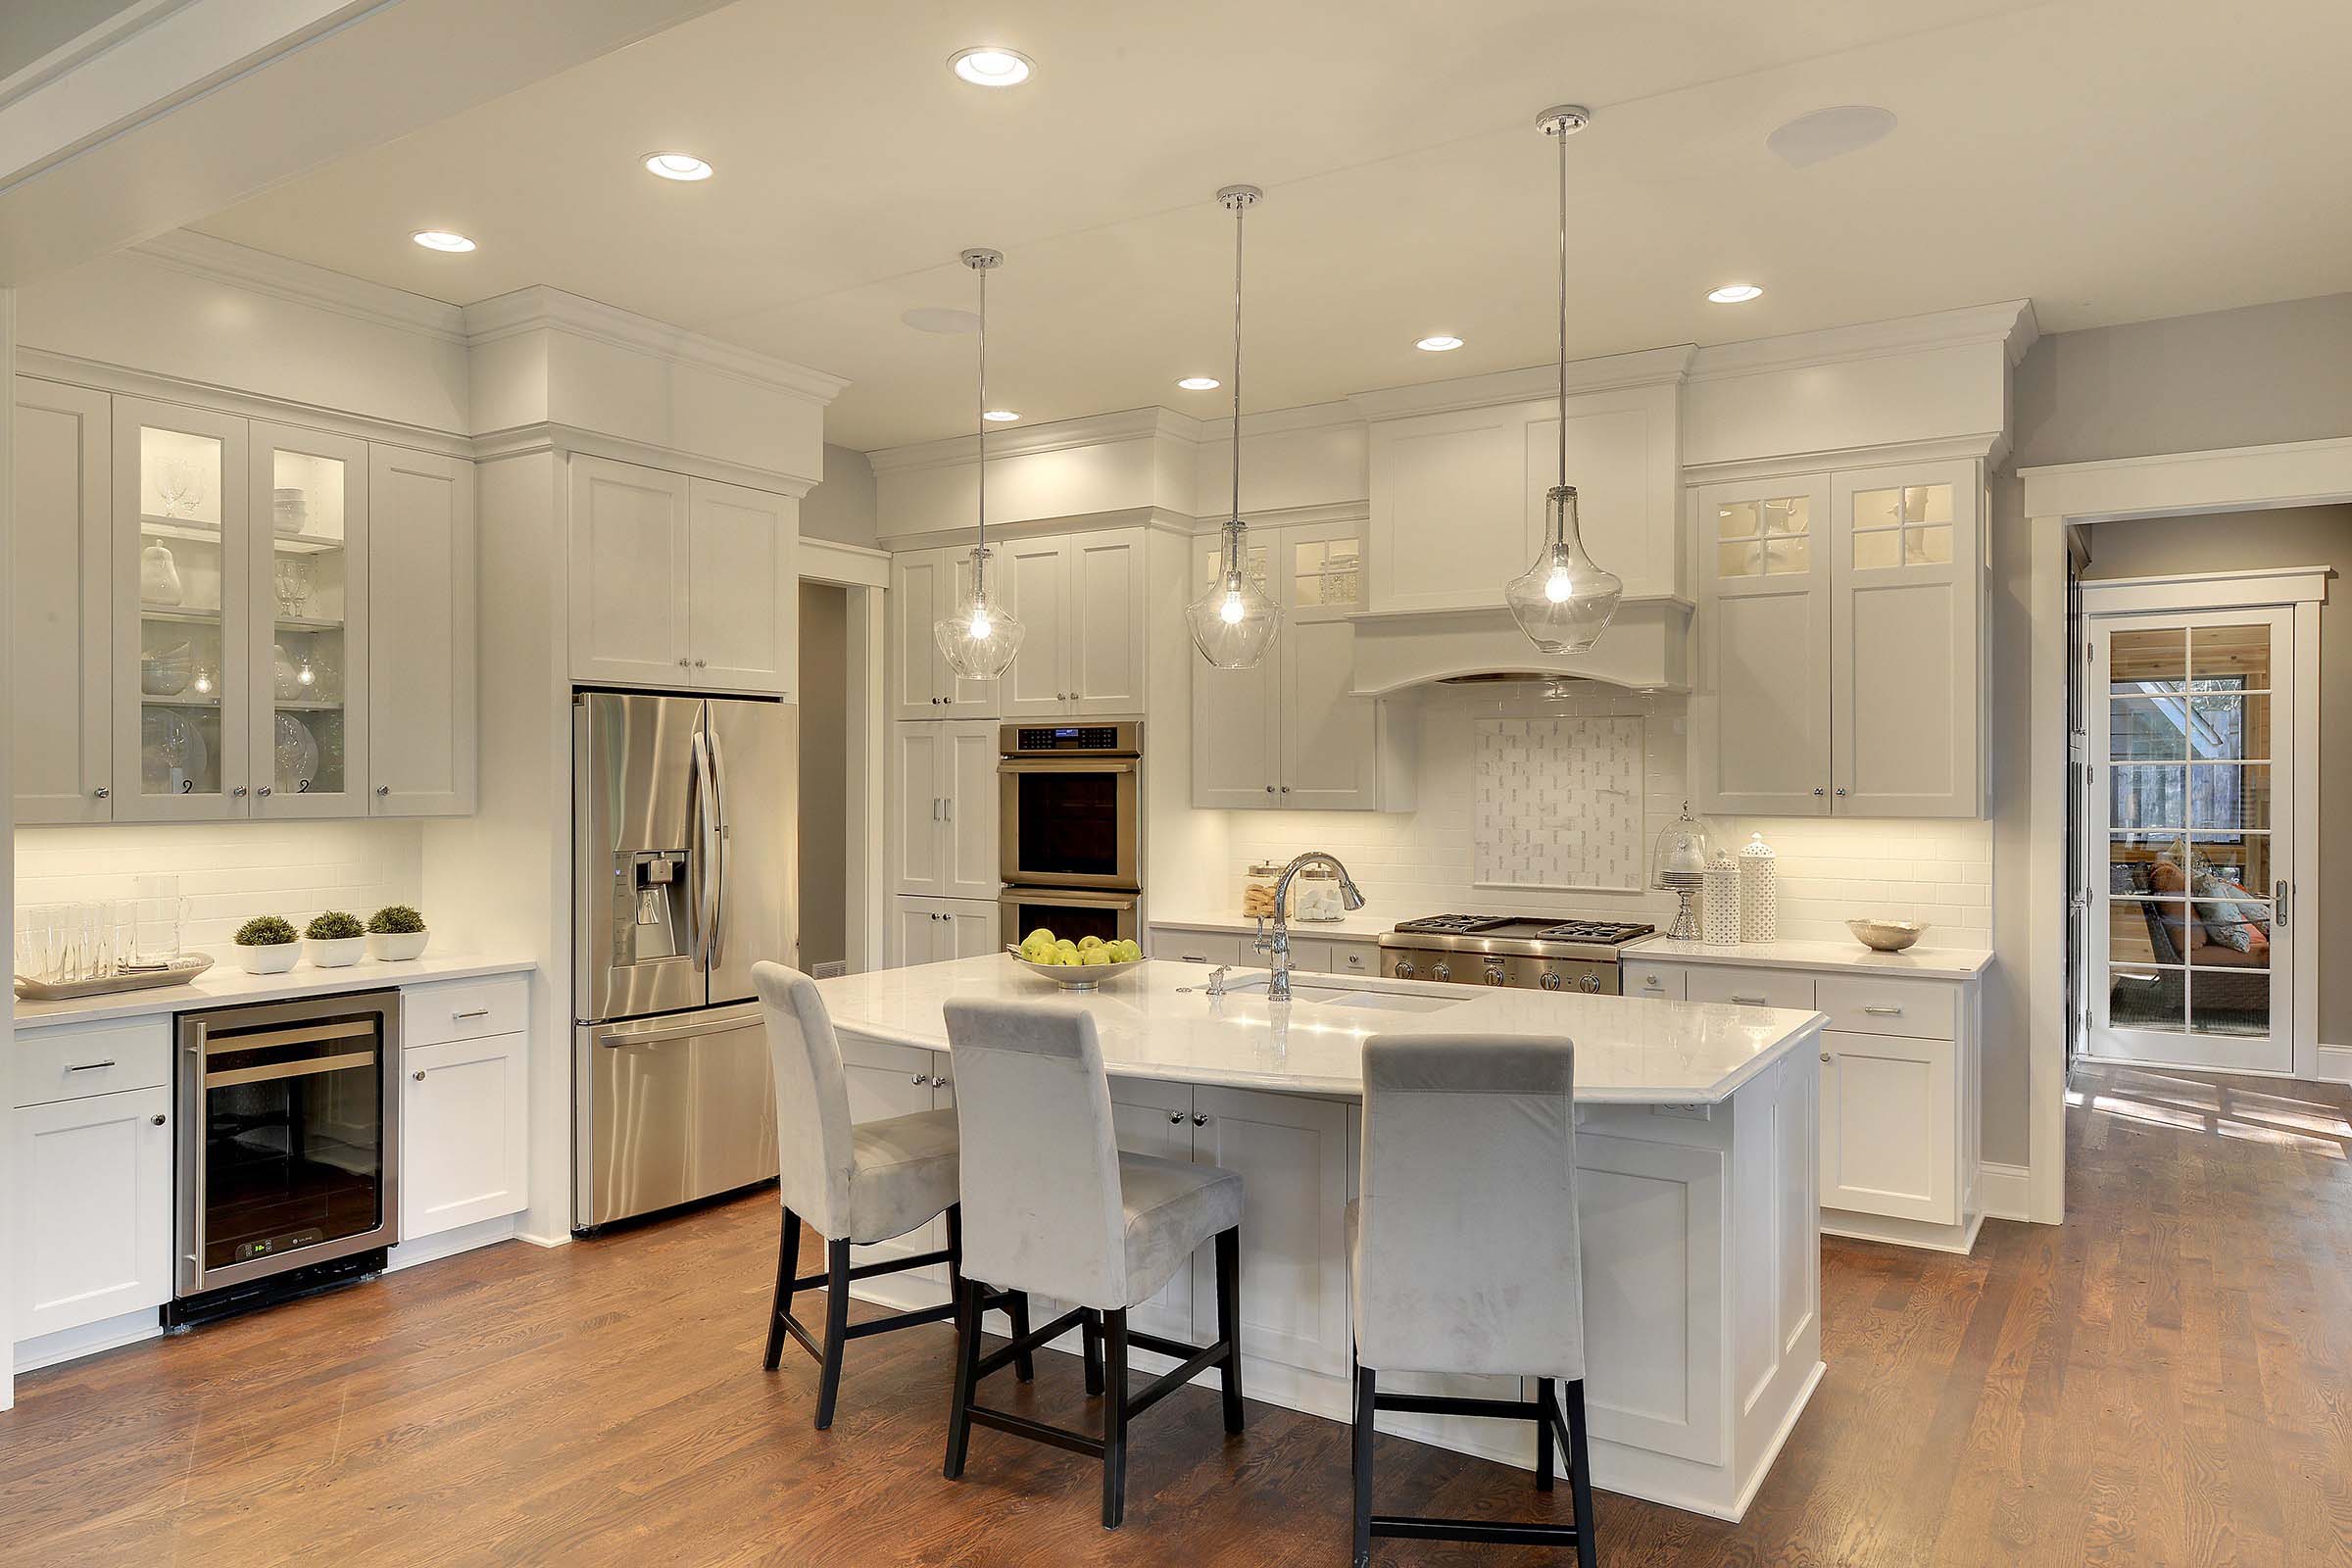 A spacious kitchen fitted with white cabinets and a center island.